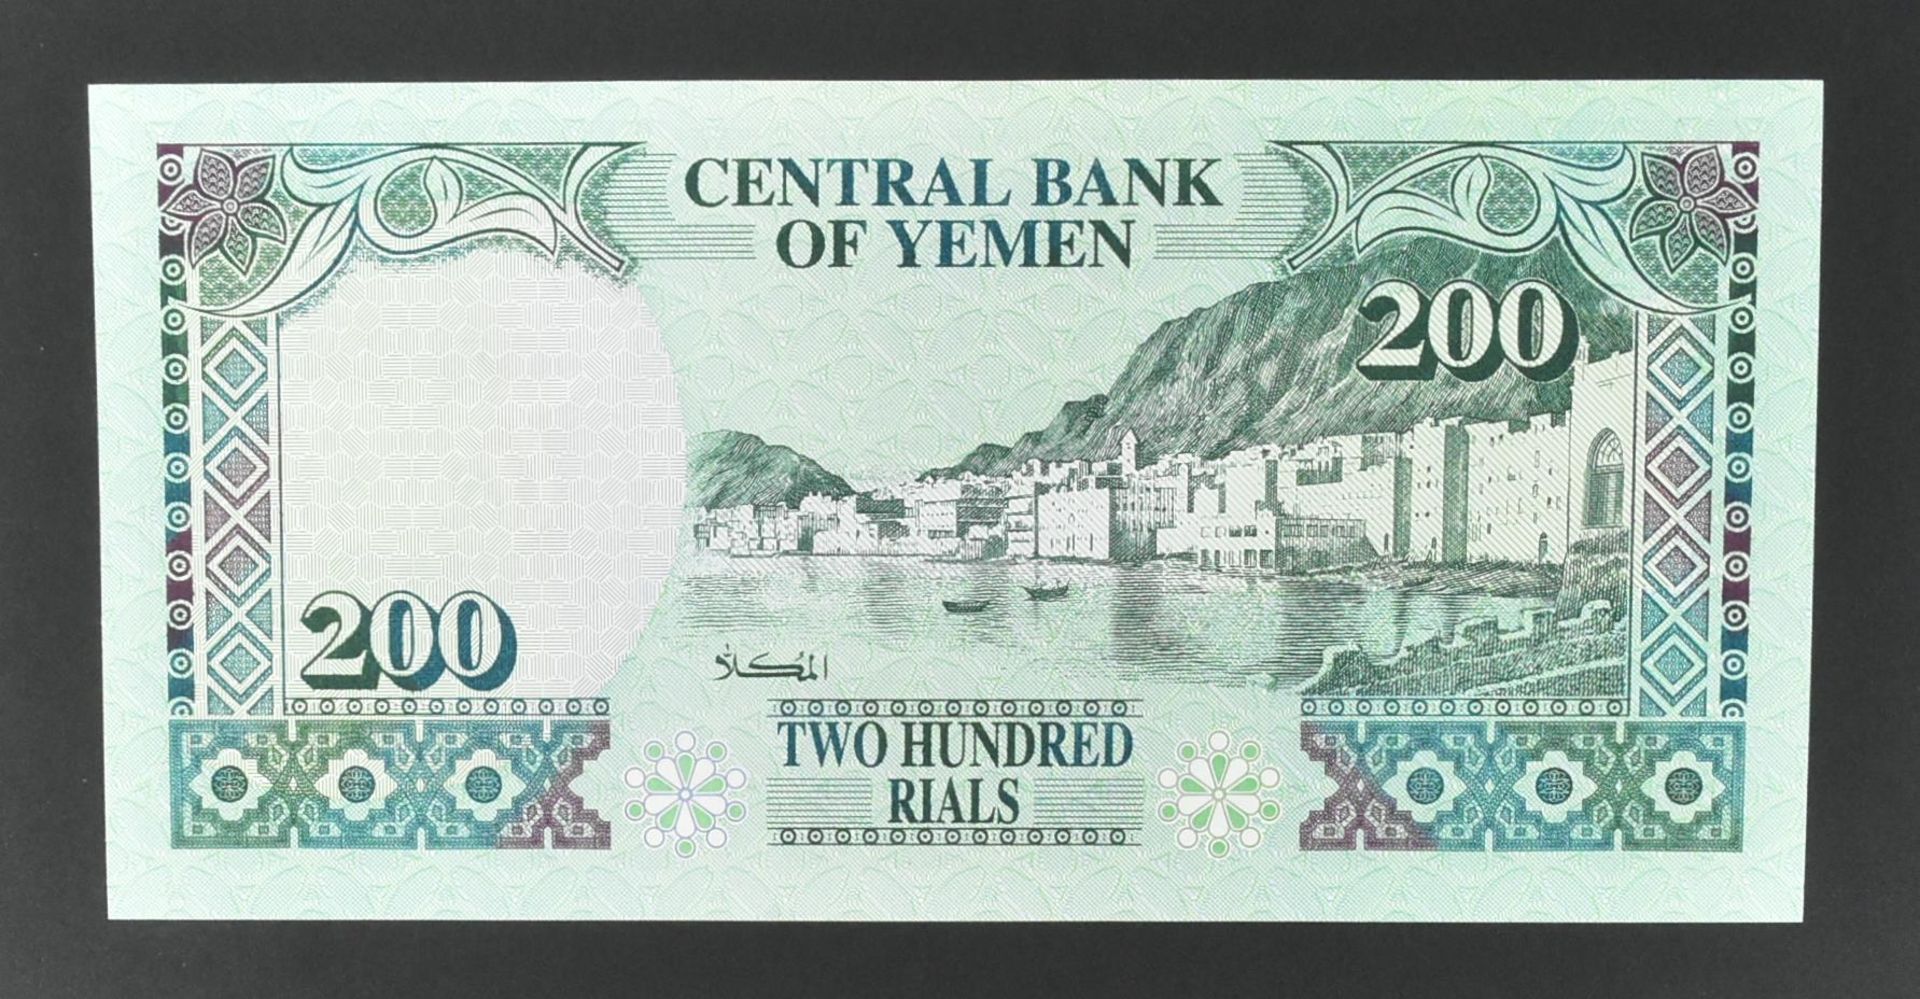 COLLECTION OF INTERNATIONAL UNCIRCULATED BANK NOTES - Image 32 of 36